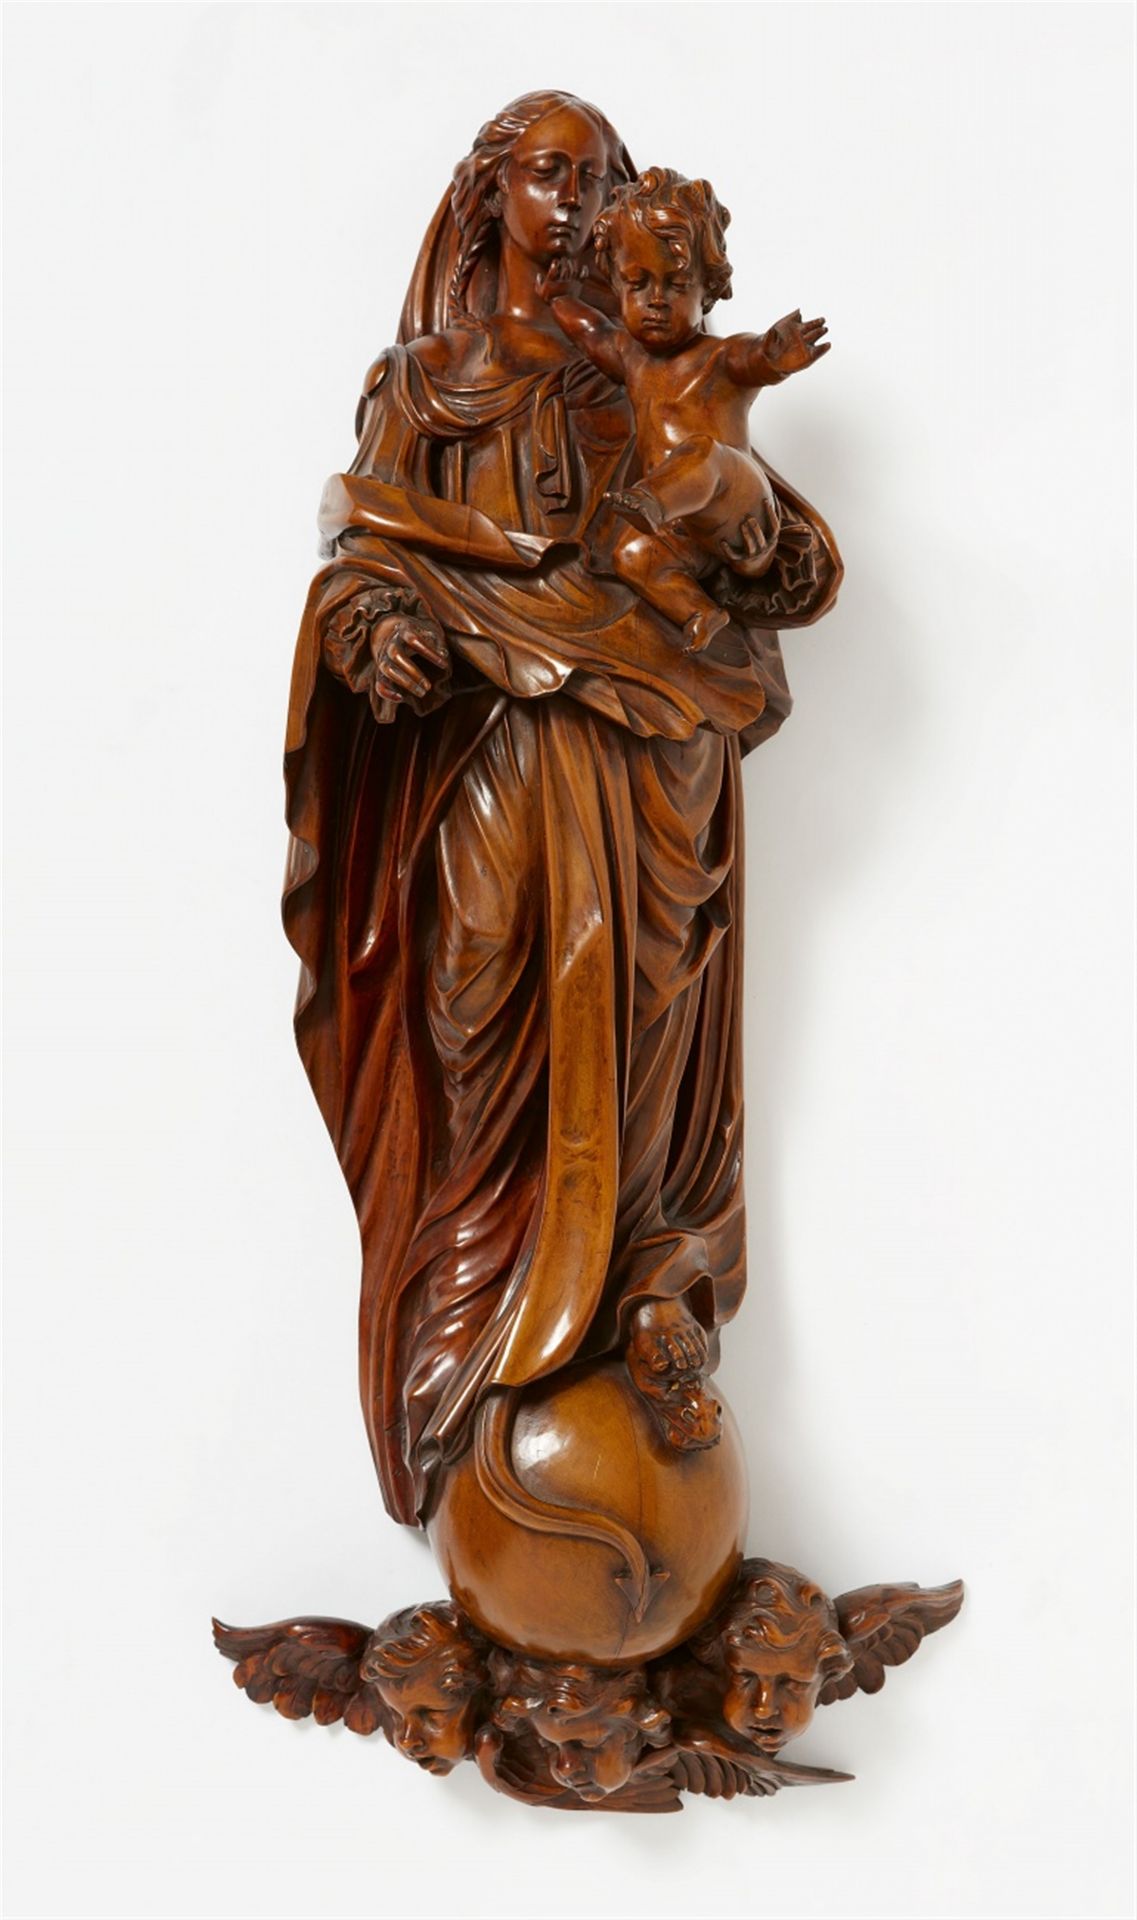 A Flemish carved wood figure of the Virgin and Child, late 17th century